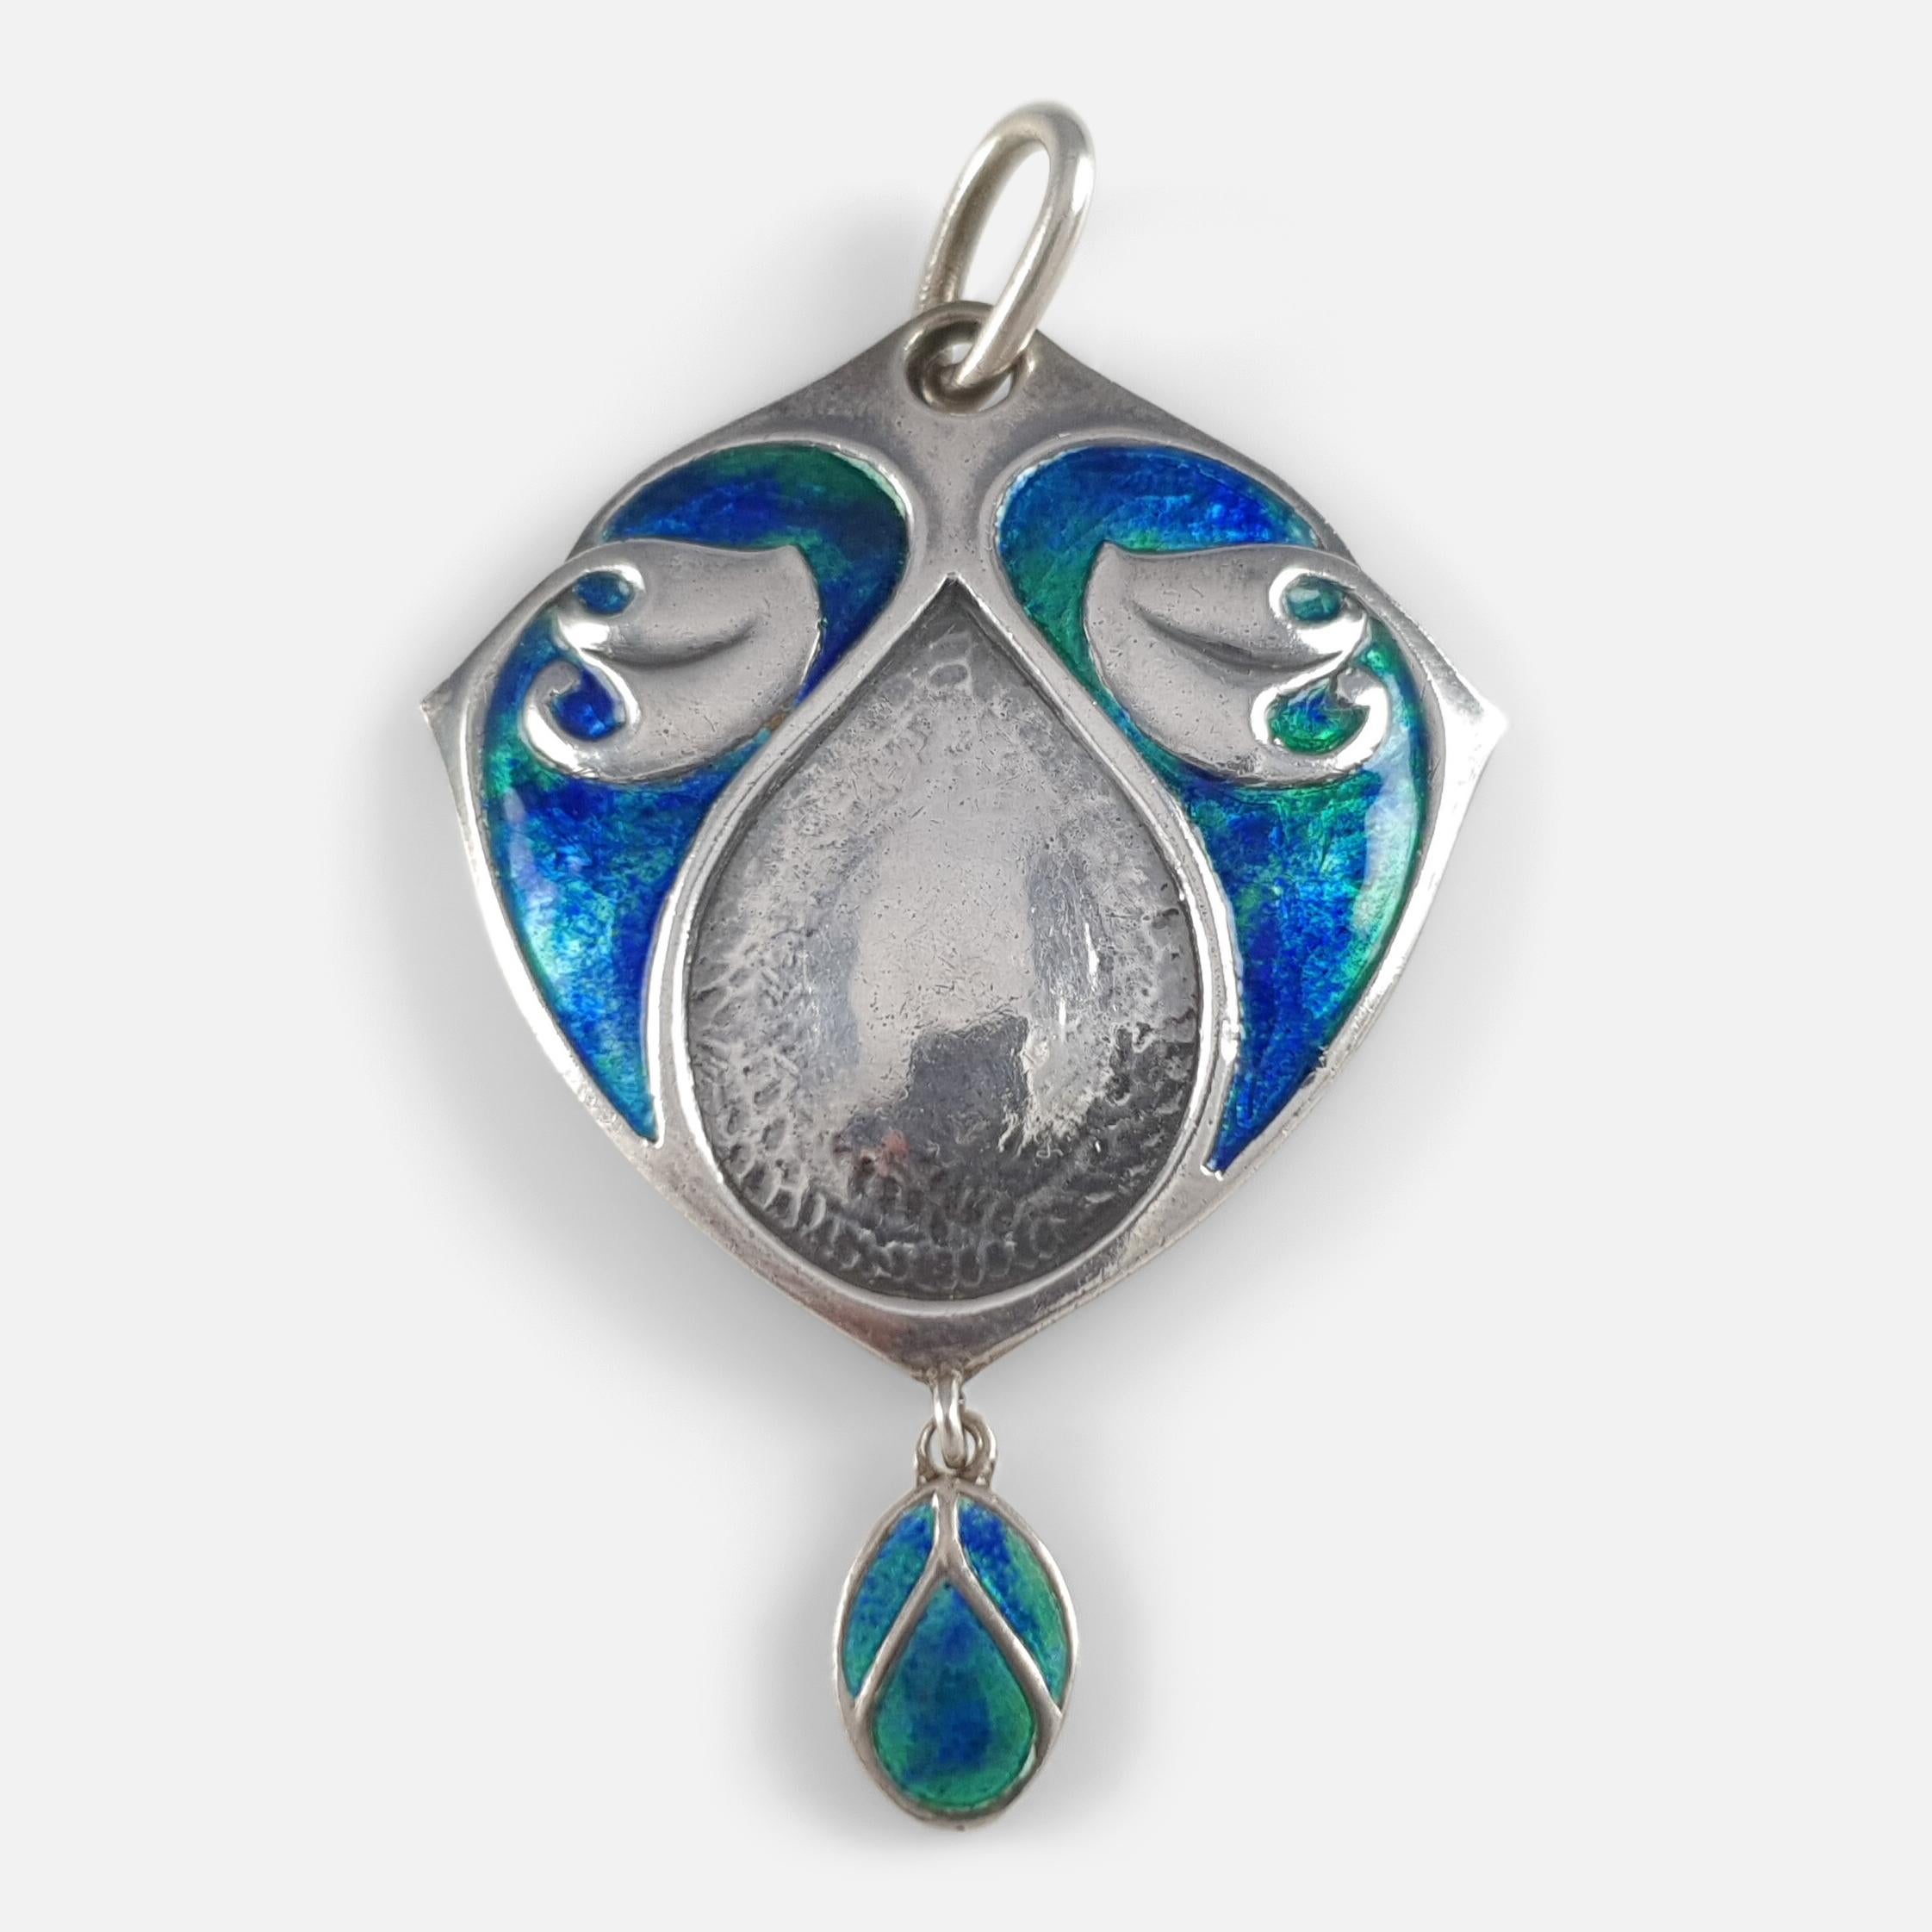 Description: - This is a superb antique Arts & Crafts spot-beaten silver & enamel drop pendant by Murrle Bennett & Co, circa 1905. It is stamped '950', & 'MBCo' for Murrle Bennett and Co.

Period: - Early 20th Century.

Date: - Circa